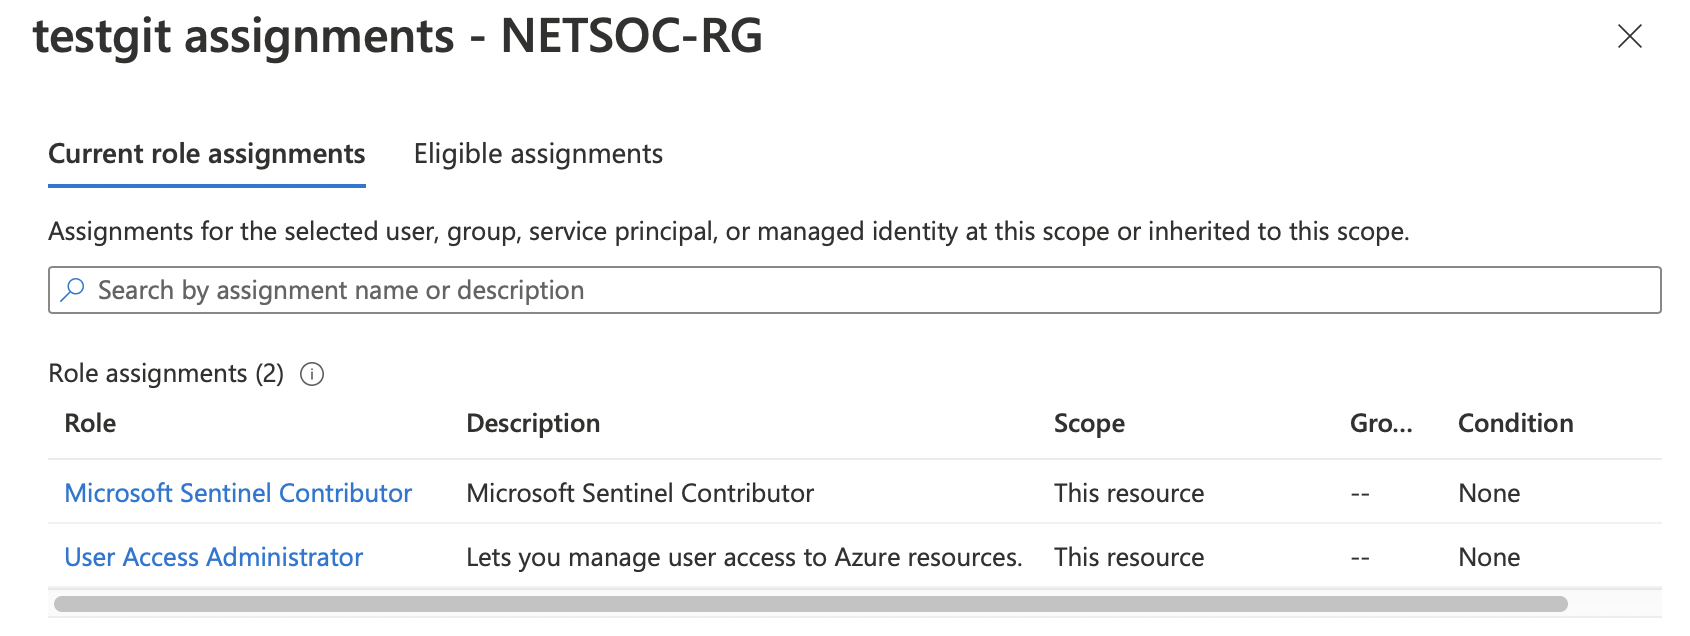 /posts/Deploy-Custom-Content-In-Microsoft-Sentinel-Using-Repositories.assets/image-20220927081028648.png